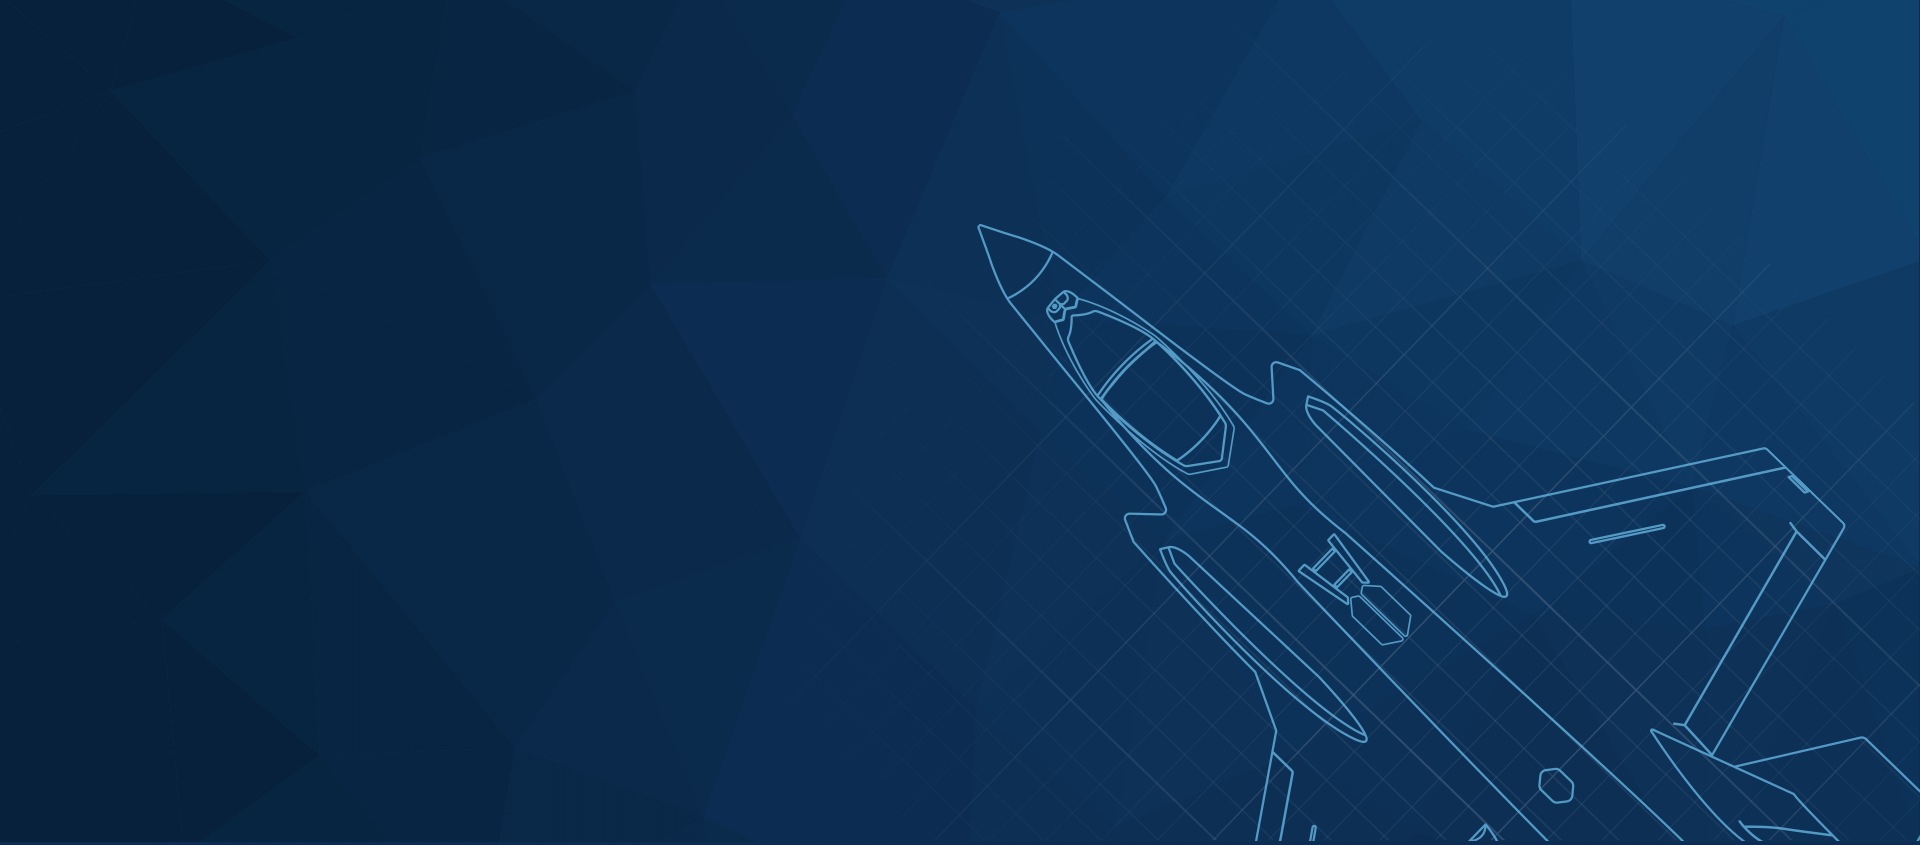 low-poly background with aircraft wireframe for Johnson Supply Company